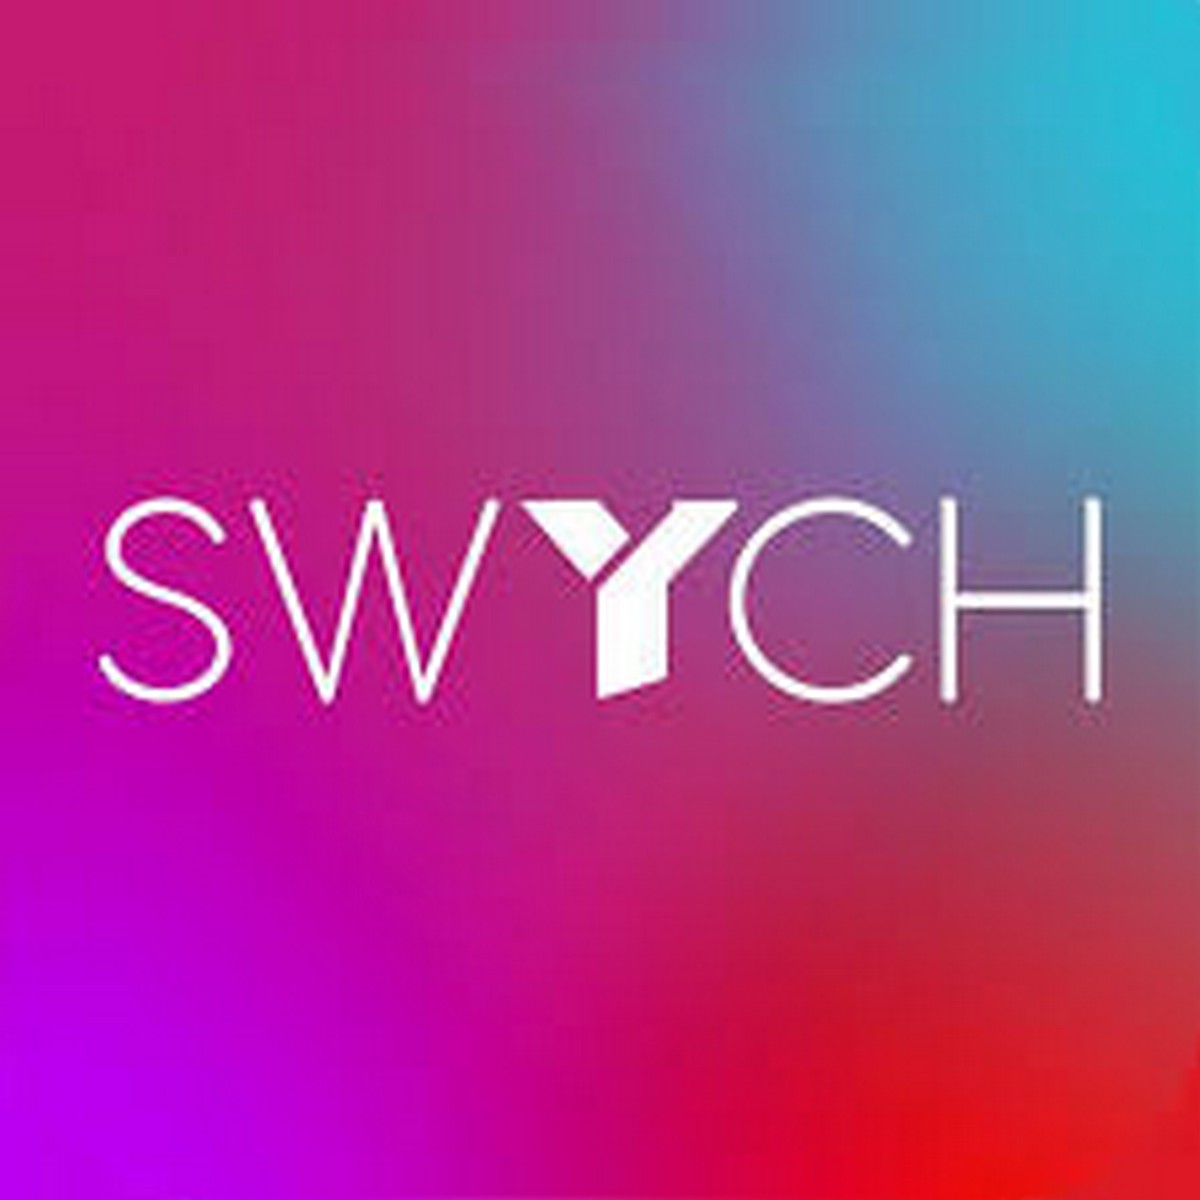 Swych Aims to Make Travel to US Easier by Eliminating Currency Conversion